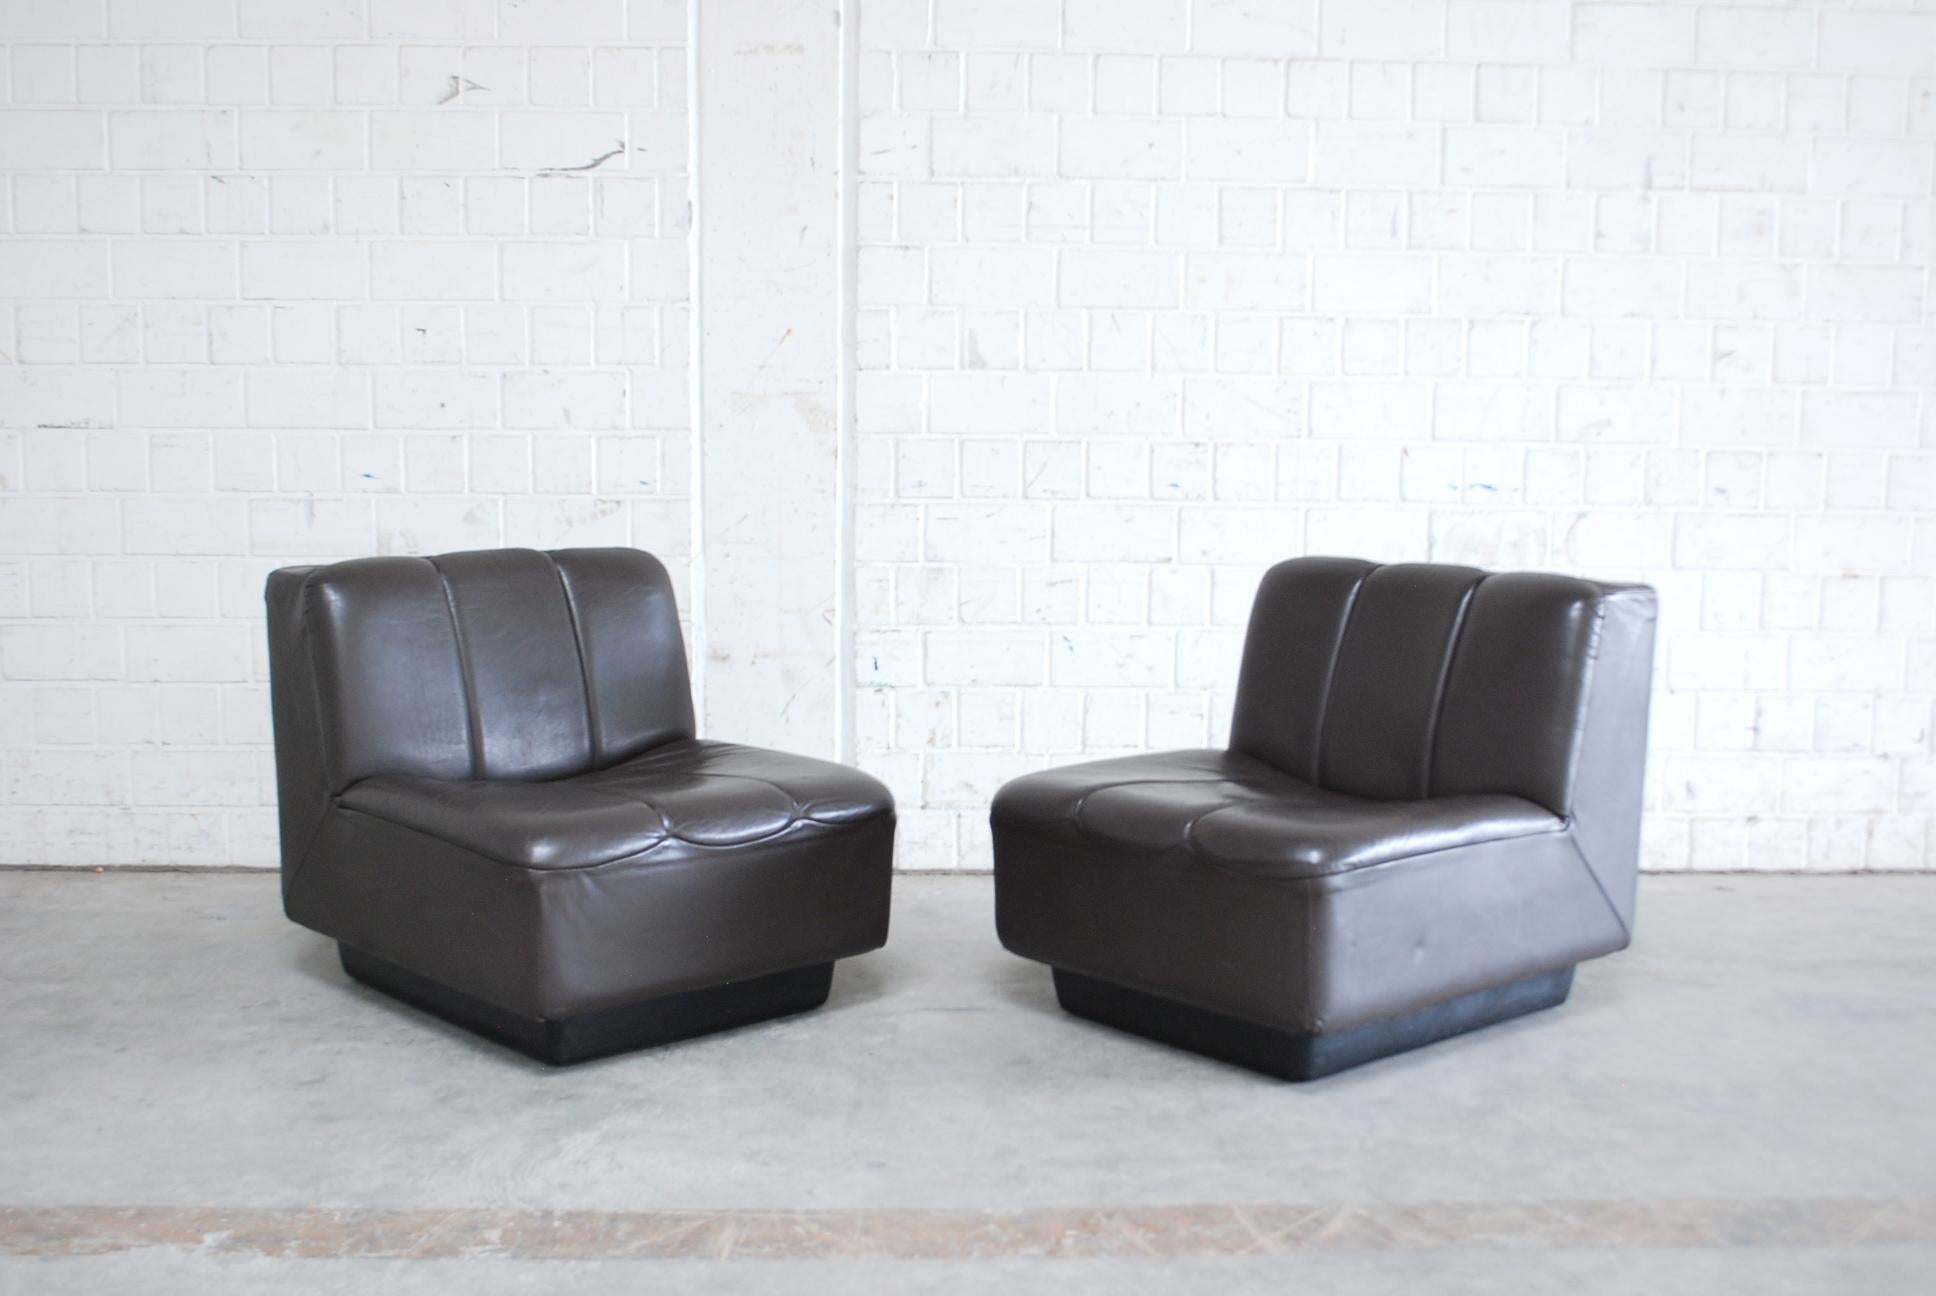 Vintage design leather modul chair from Germany, 1970.
Brown semianiline leather.
The frame is made of thick plastic.
They can arrange together for a 2-seat sofa or alone.
Set of 2 chairs.

4 chairs are available.

 